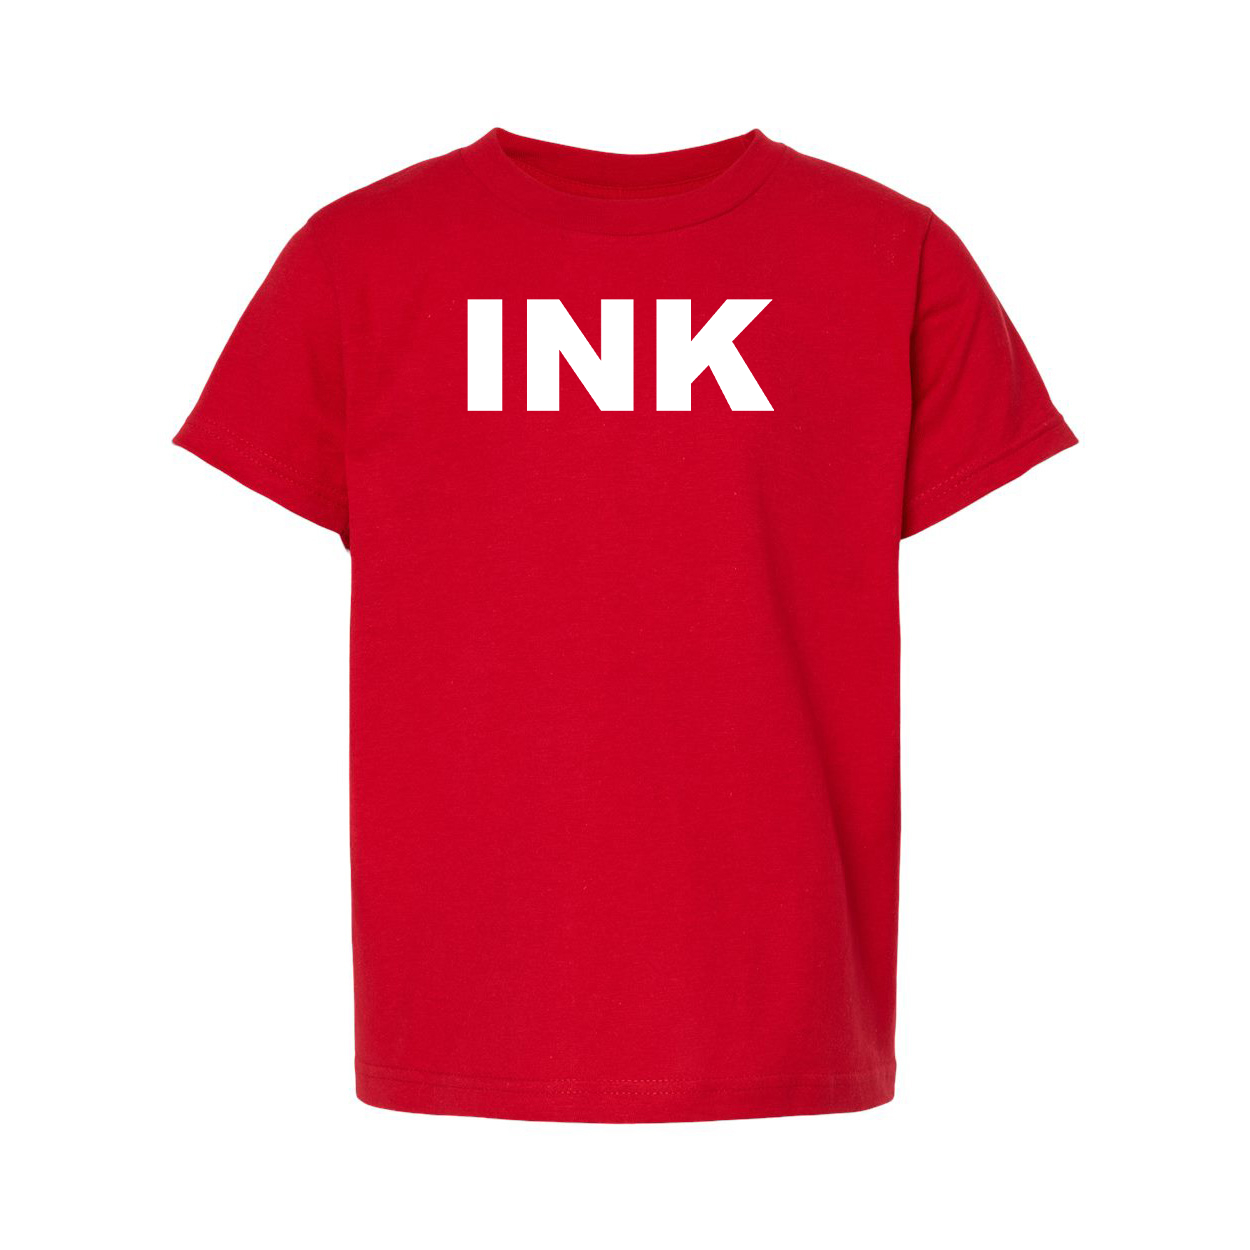 Ink Brand Logo Classic Youth Unisex T-Shirt Red 